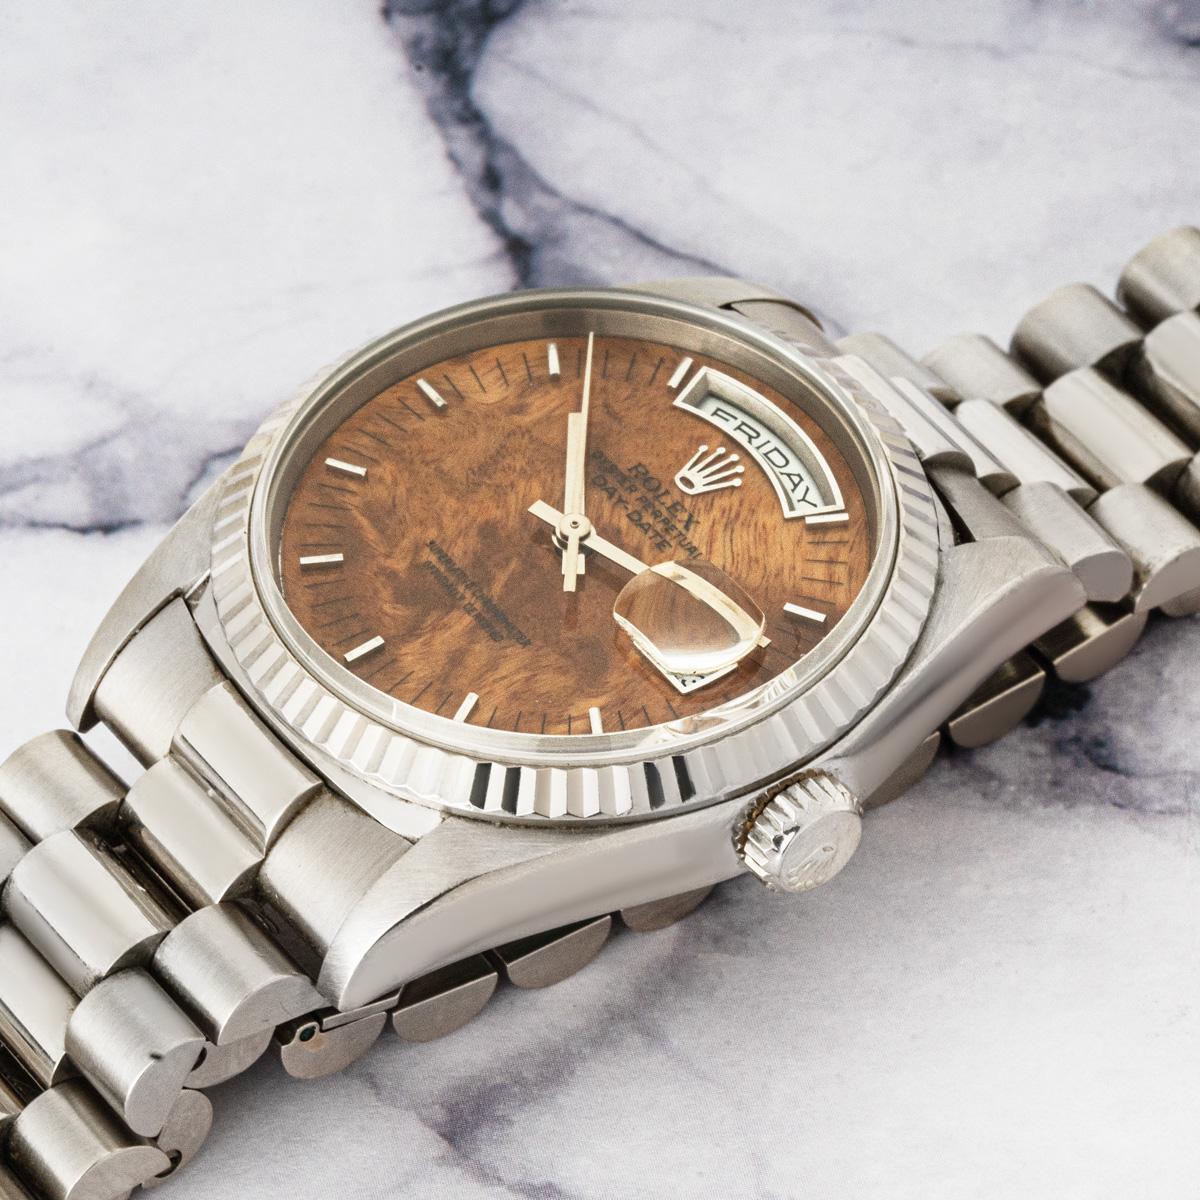 A 36mm Day-Date by Rolex. Produced in white gold and featuring a wood dial, this combination is extremely rare to find in the market. The fluted bezel, president bracelet, and concealed clasp are traditional characteristics of a Day-Date.

Fitted